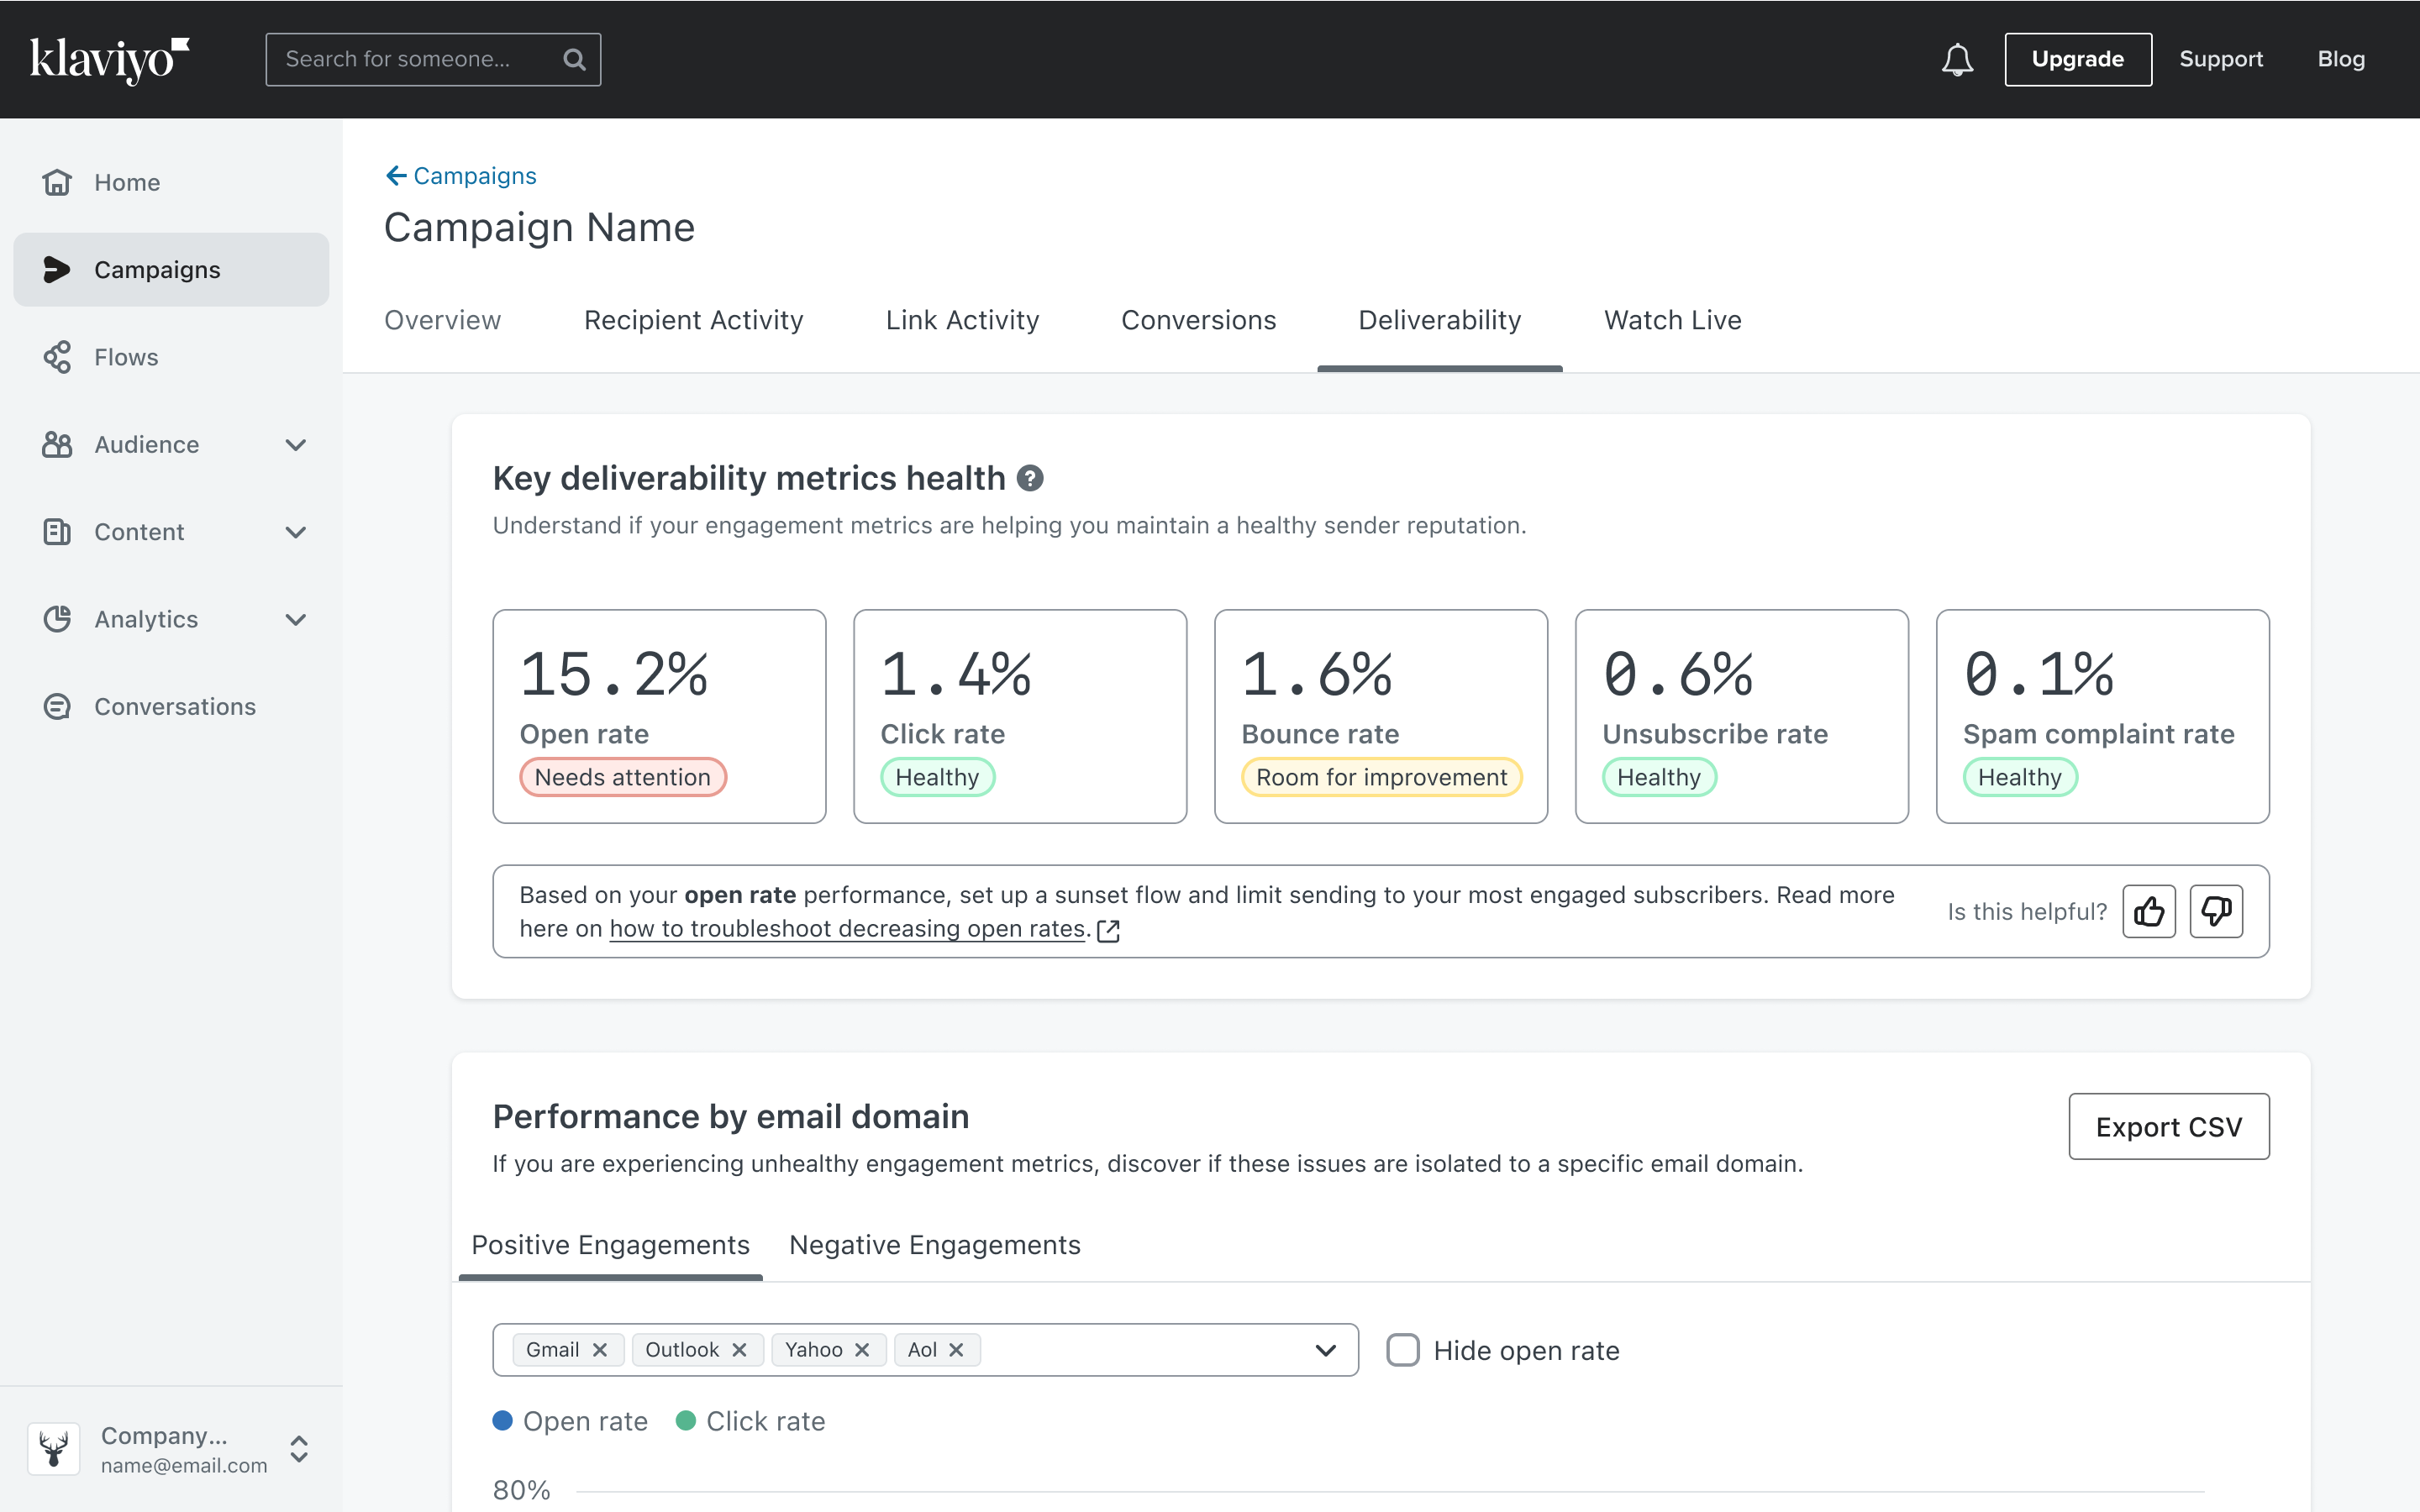 See key deliverability metrics in one place.